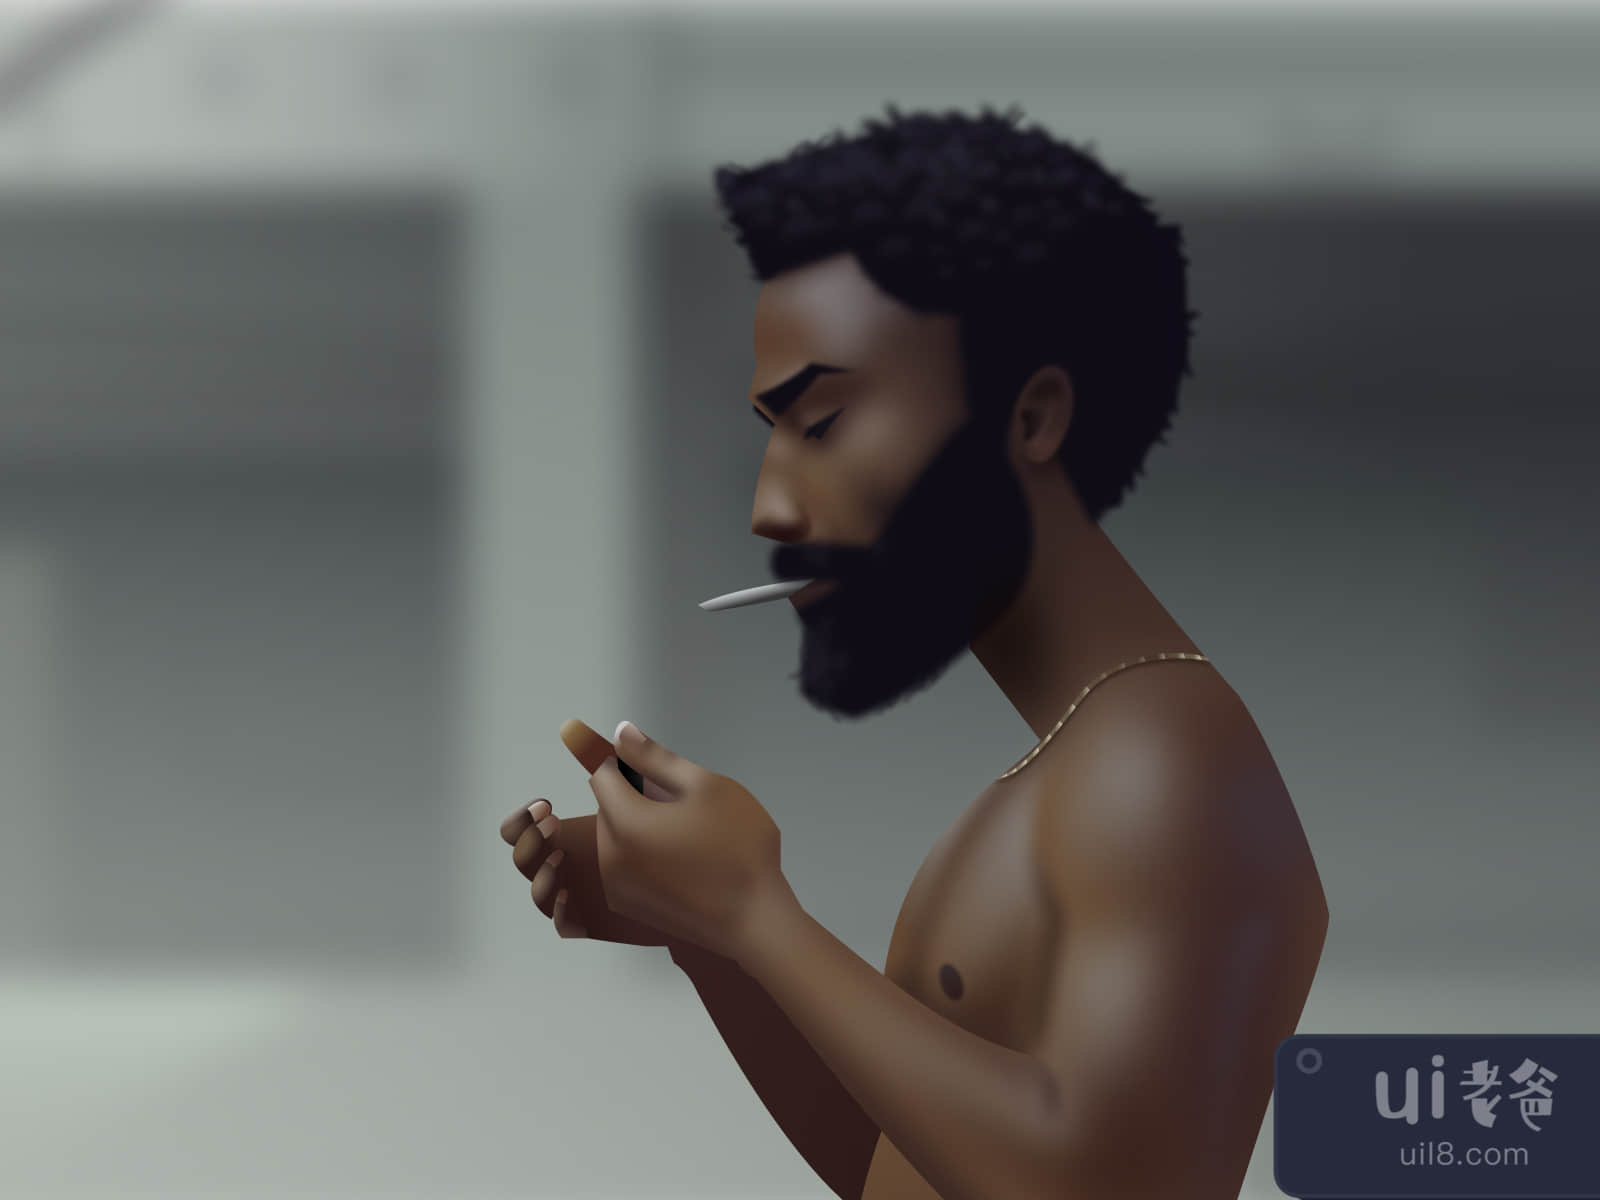 Donald Glover Vector Illustration for Figma and Adobe XD No 2